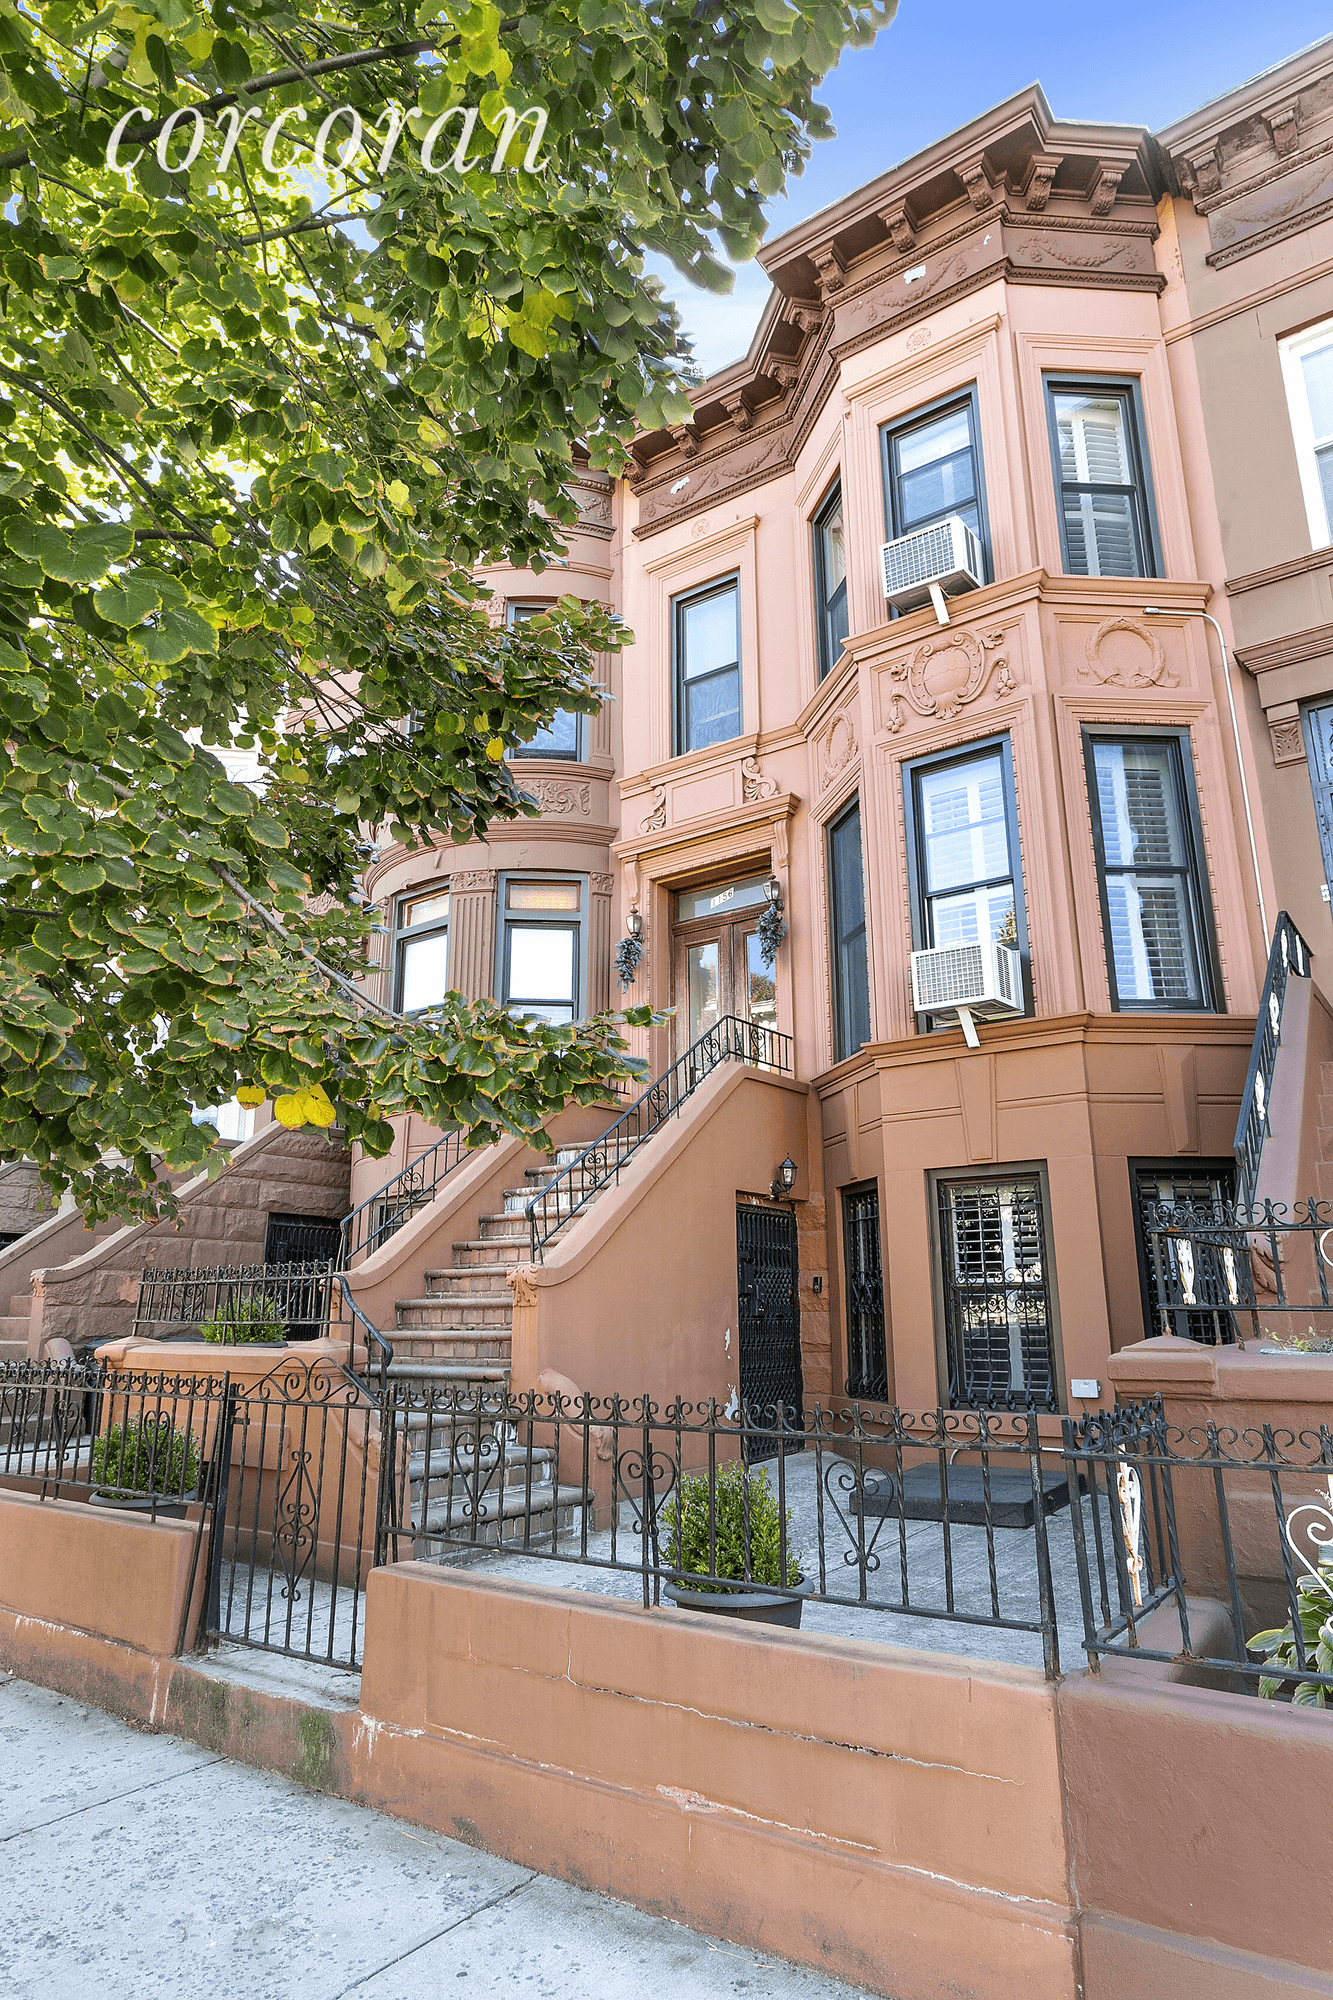 A proper home would best describe this 2 family brownstone.